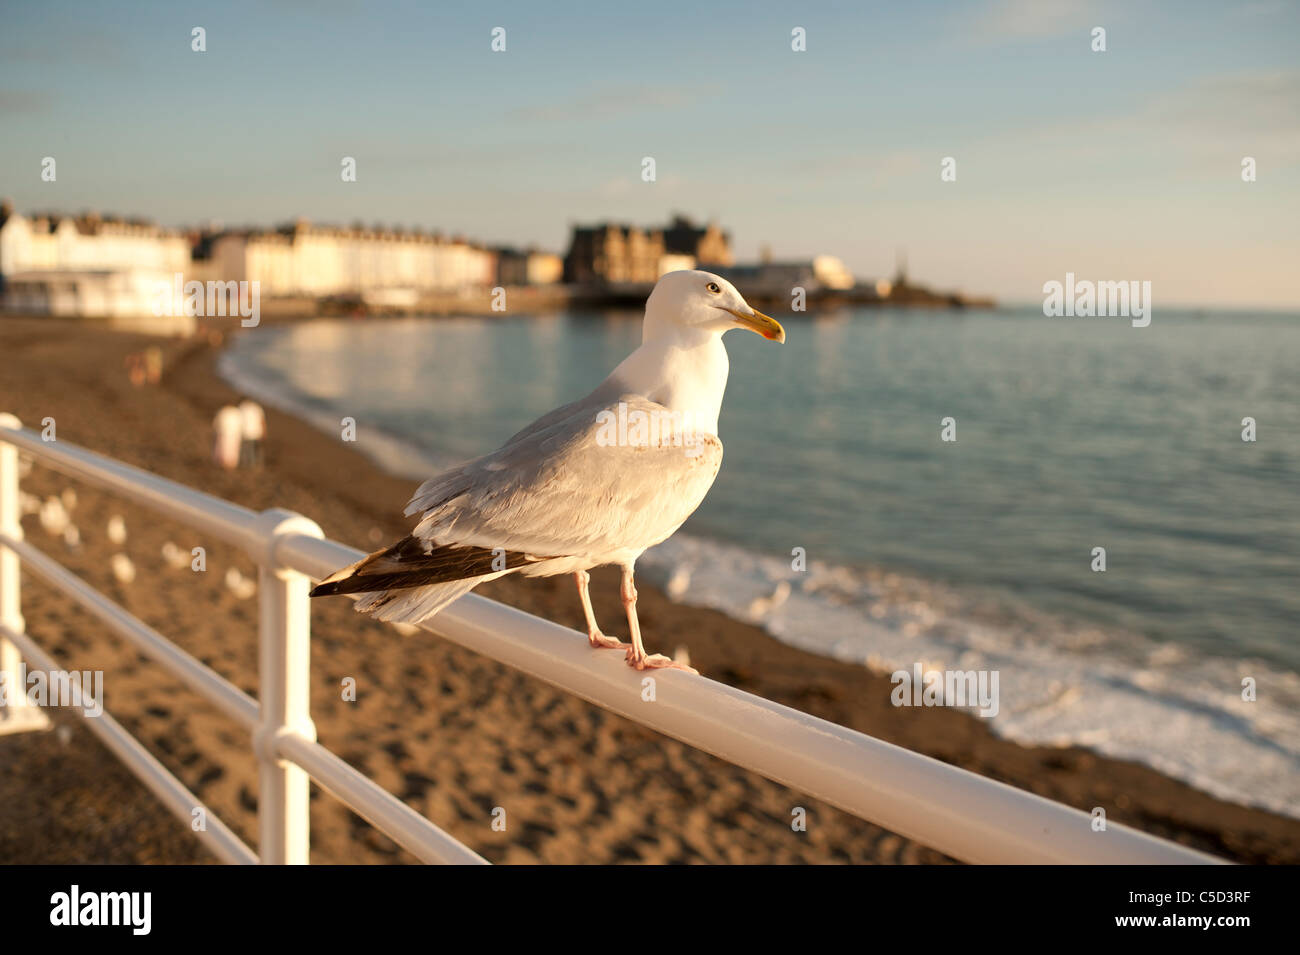 a seagull perched on the seaside railings Aberystwyth promenade Wales UK Stock Photo